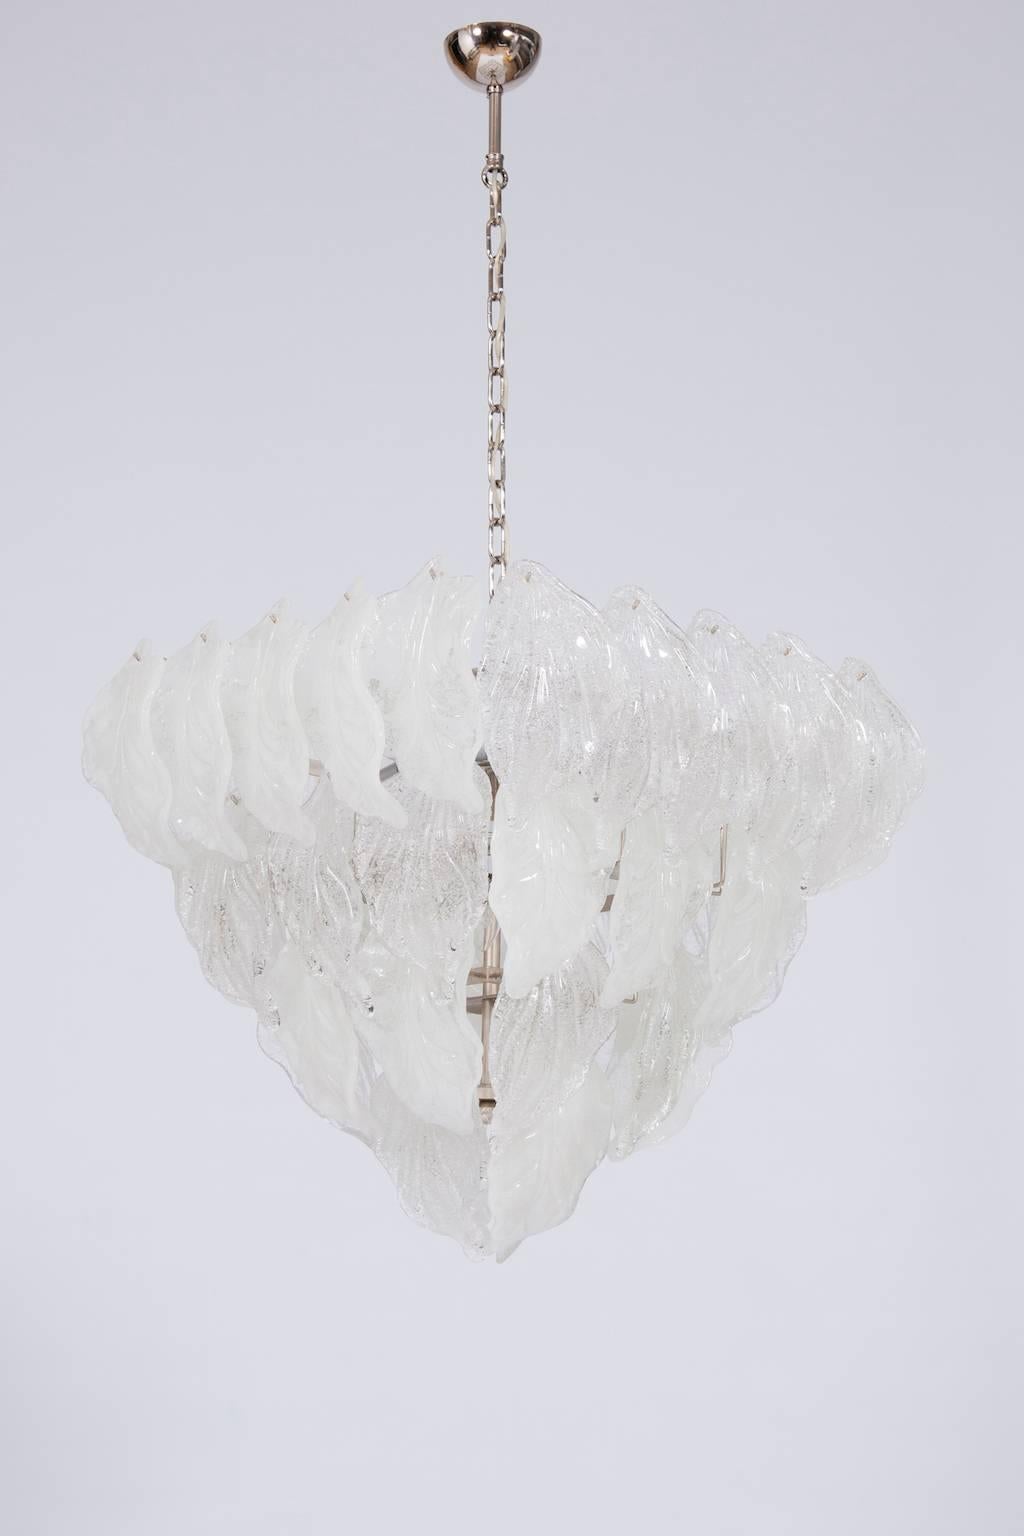 Transparent leaf details in Murano glass grace this 1970s Italian Flush Mount.
A special Italian Venetian Flush Mount, crafted from blown Murano glass and designed in the shape of a diamond with elegant transparent and white grit glass leaves,